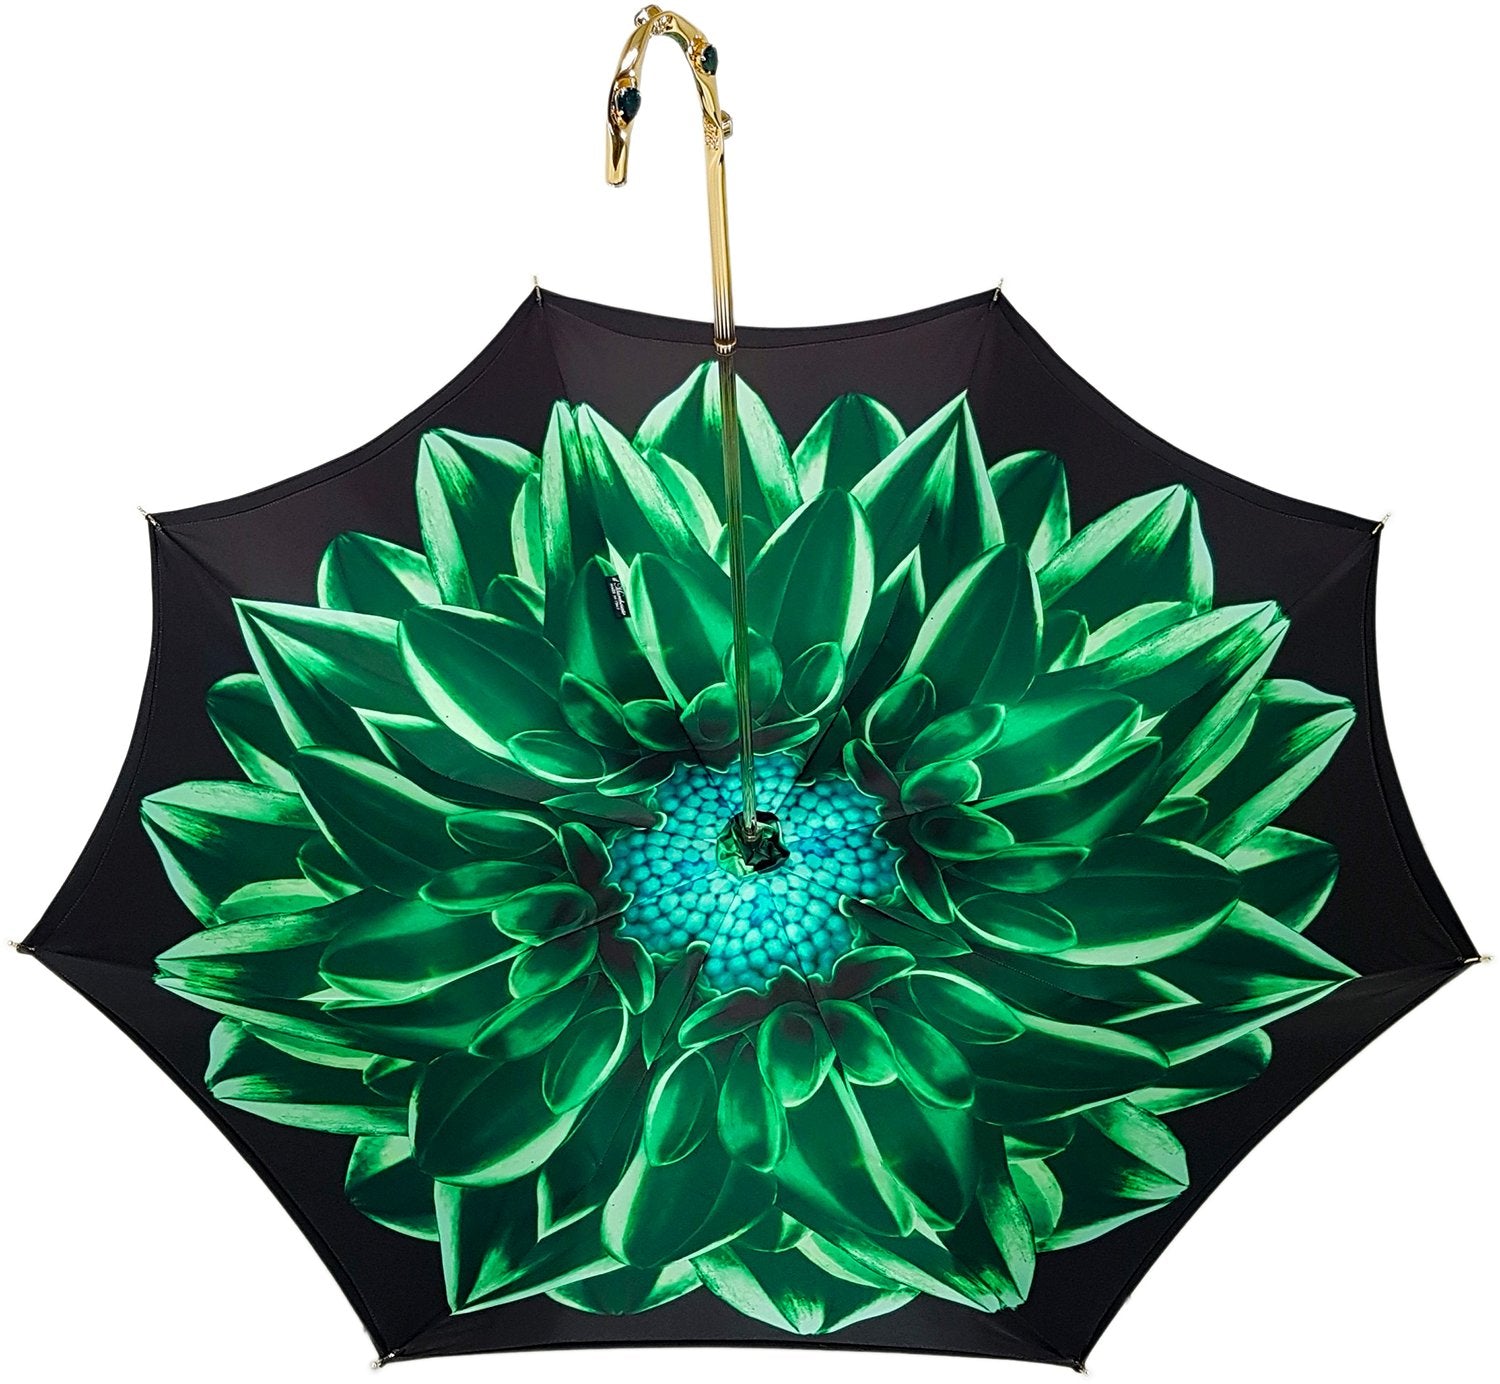 Beautiful Double Canopy Umbrella in a Luxurious Green Colored Polyester Satin - il-marchesato